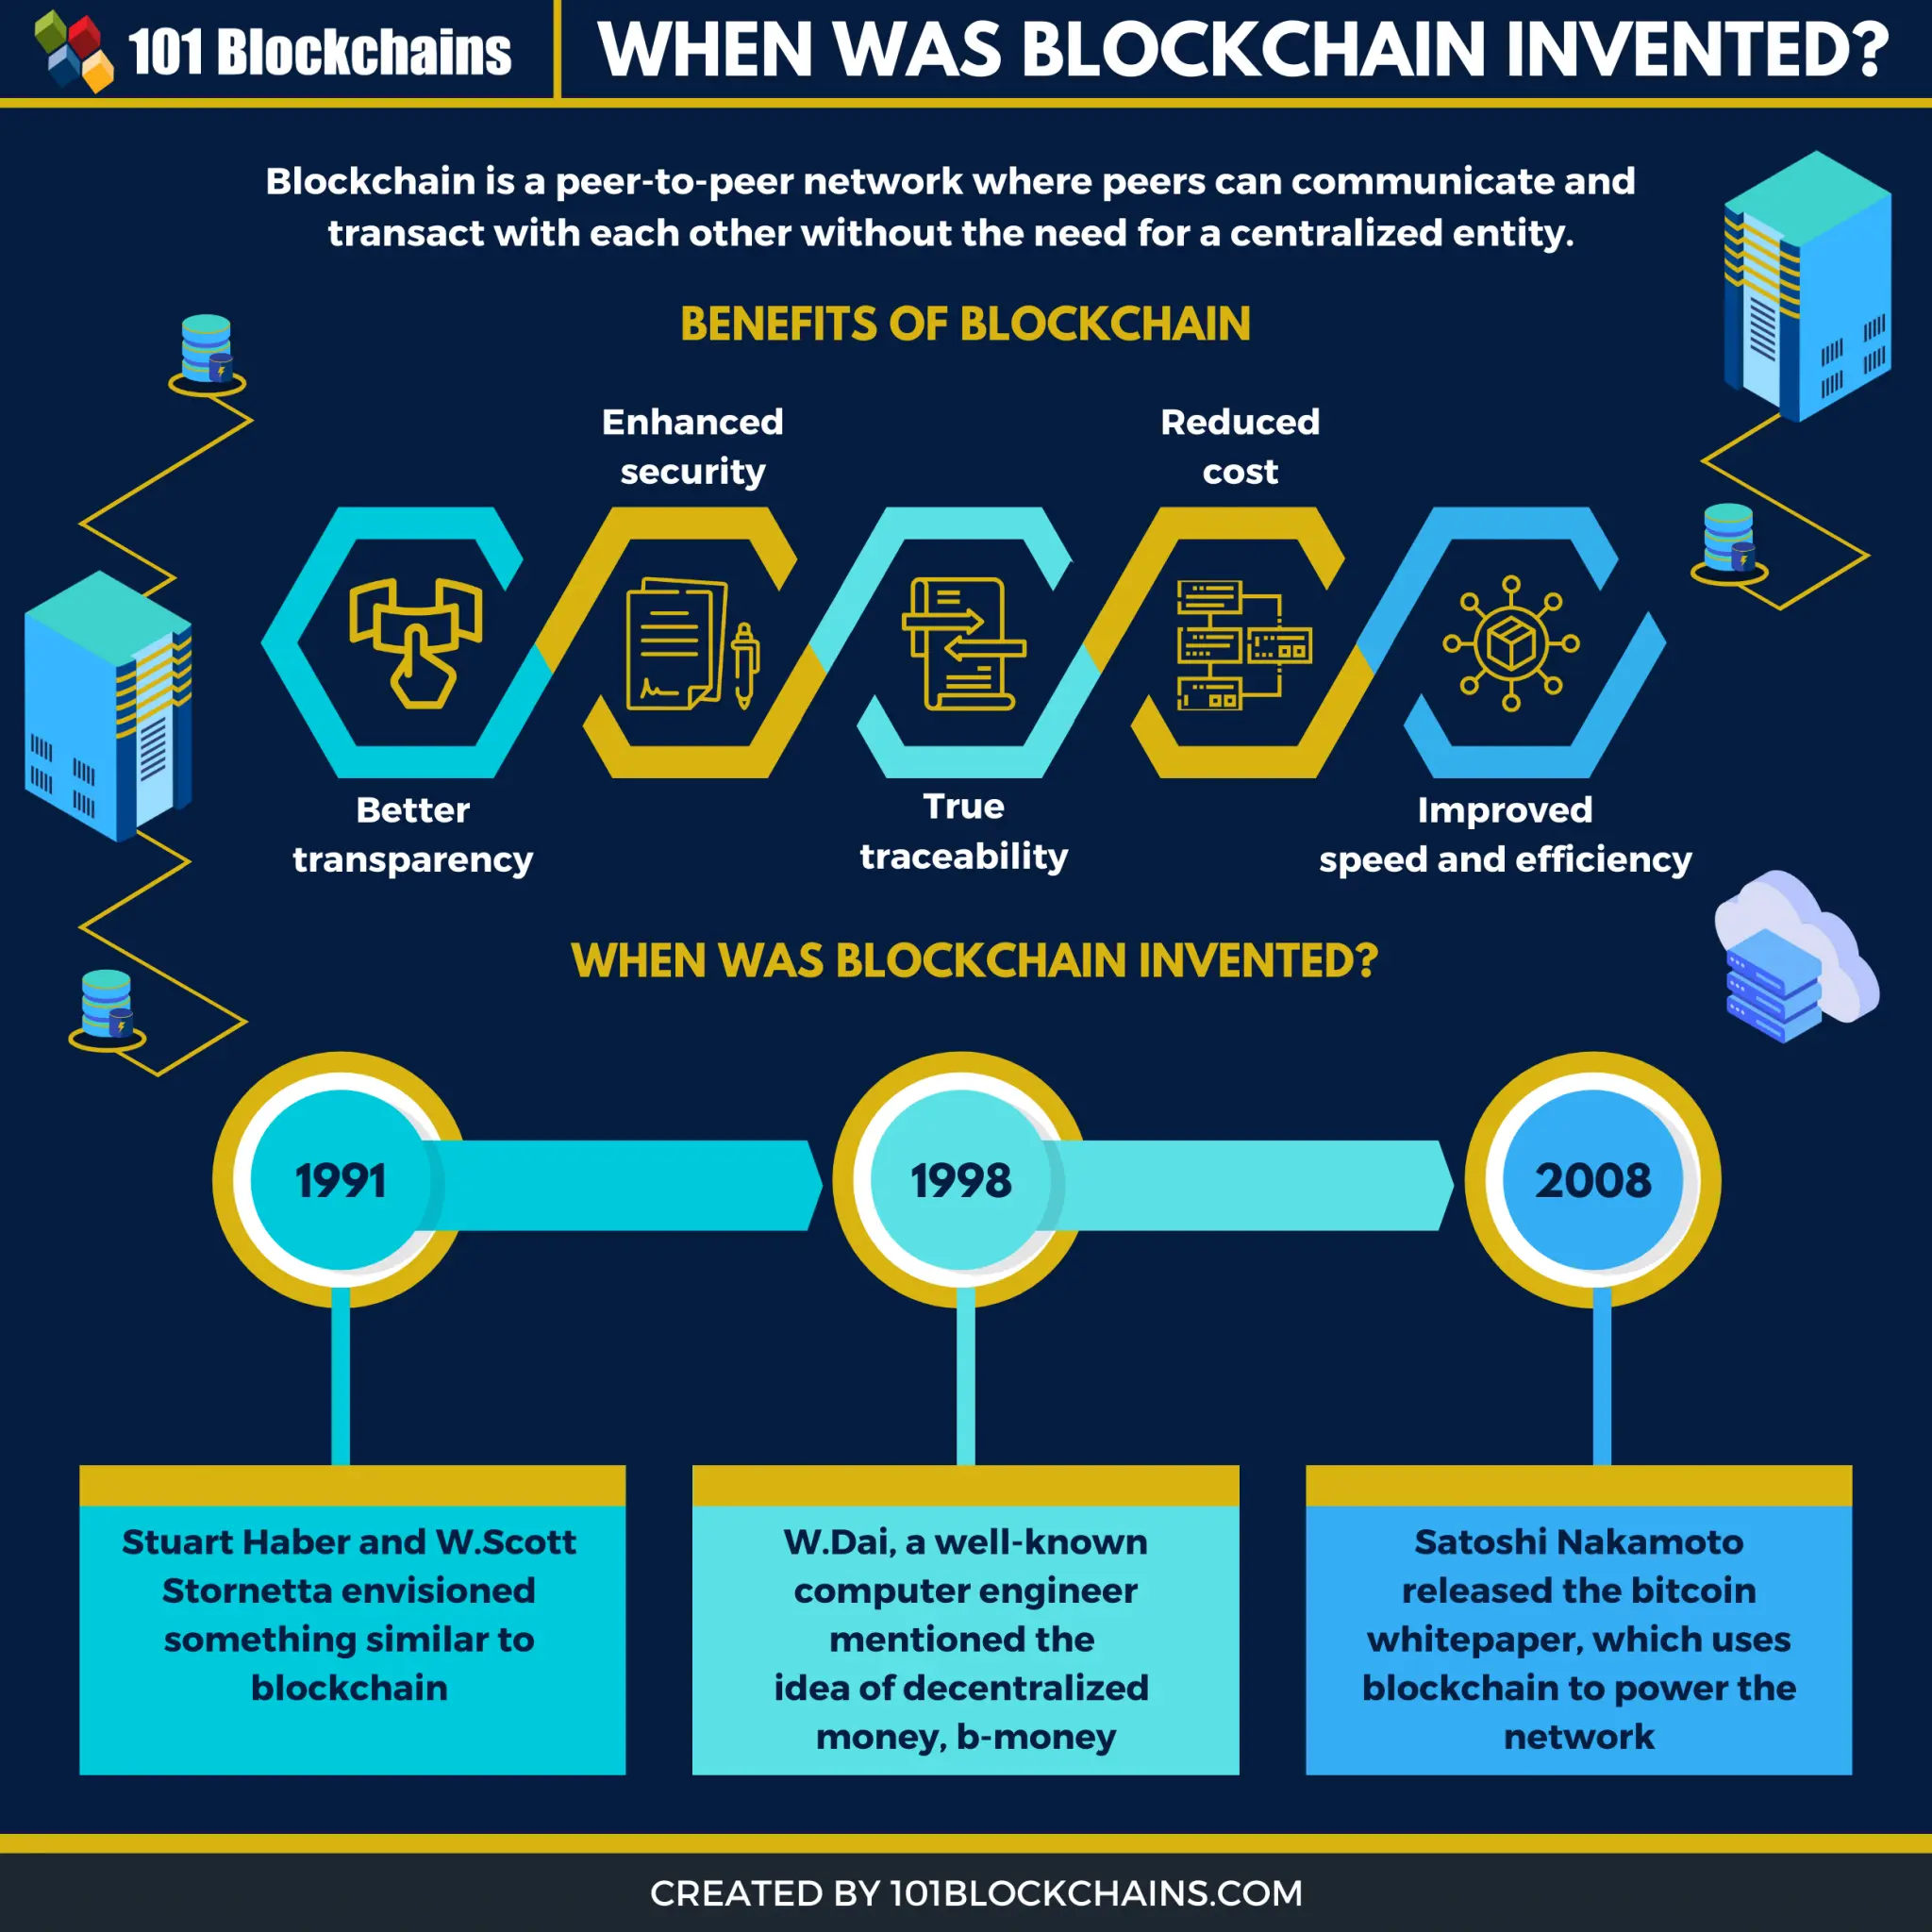 who coined the term blockchain